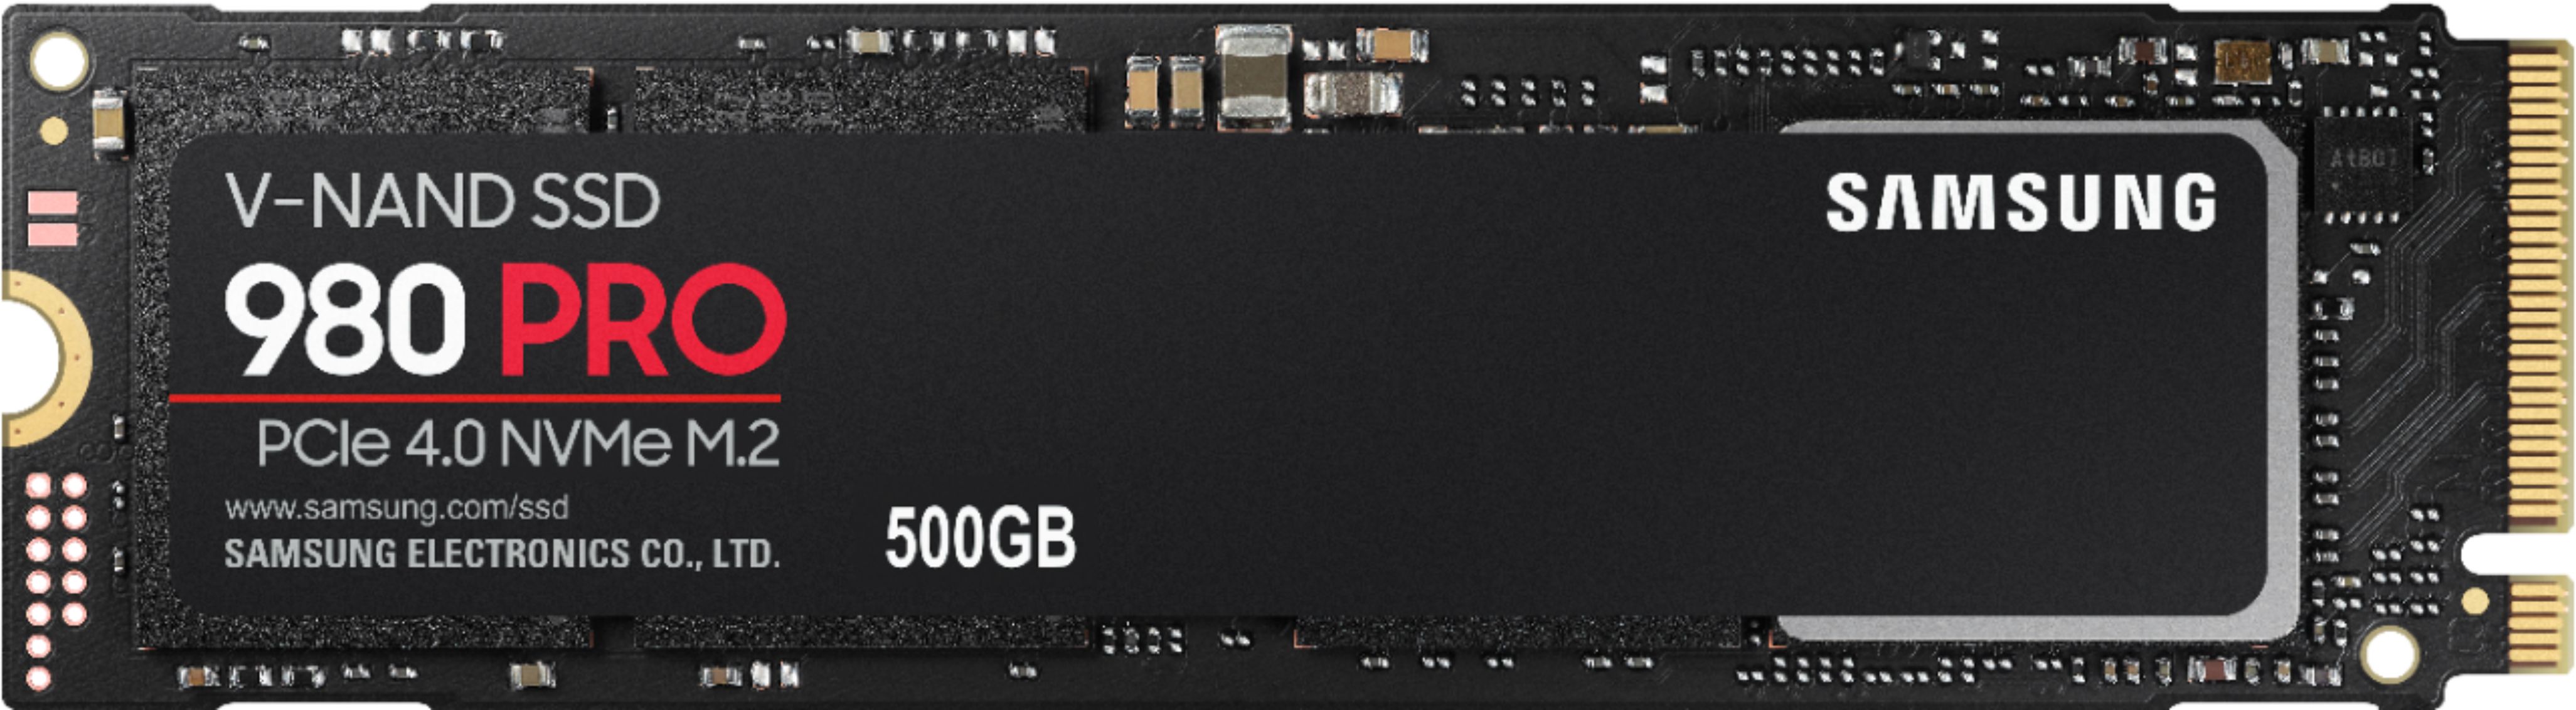 SAMSUNG 970 PRO SSD 3,500MB/s Read 2,300MB/s Write 512 GB SOLID STATE DRIVE st 